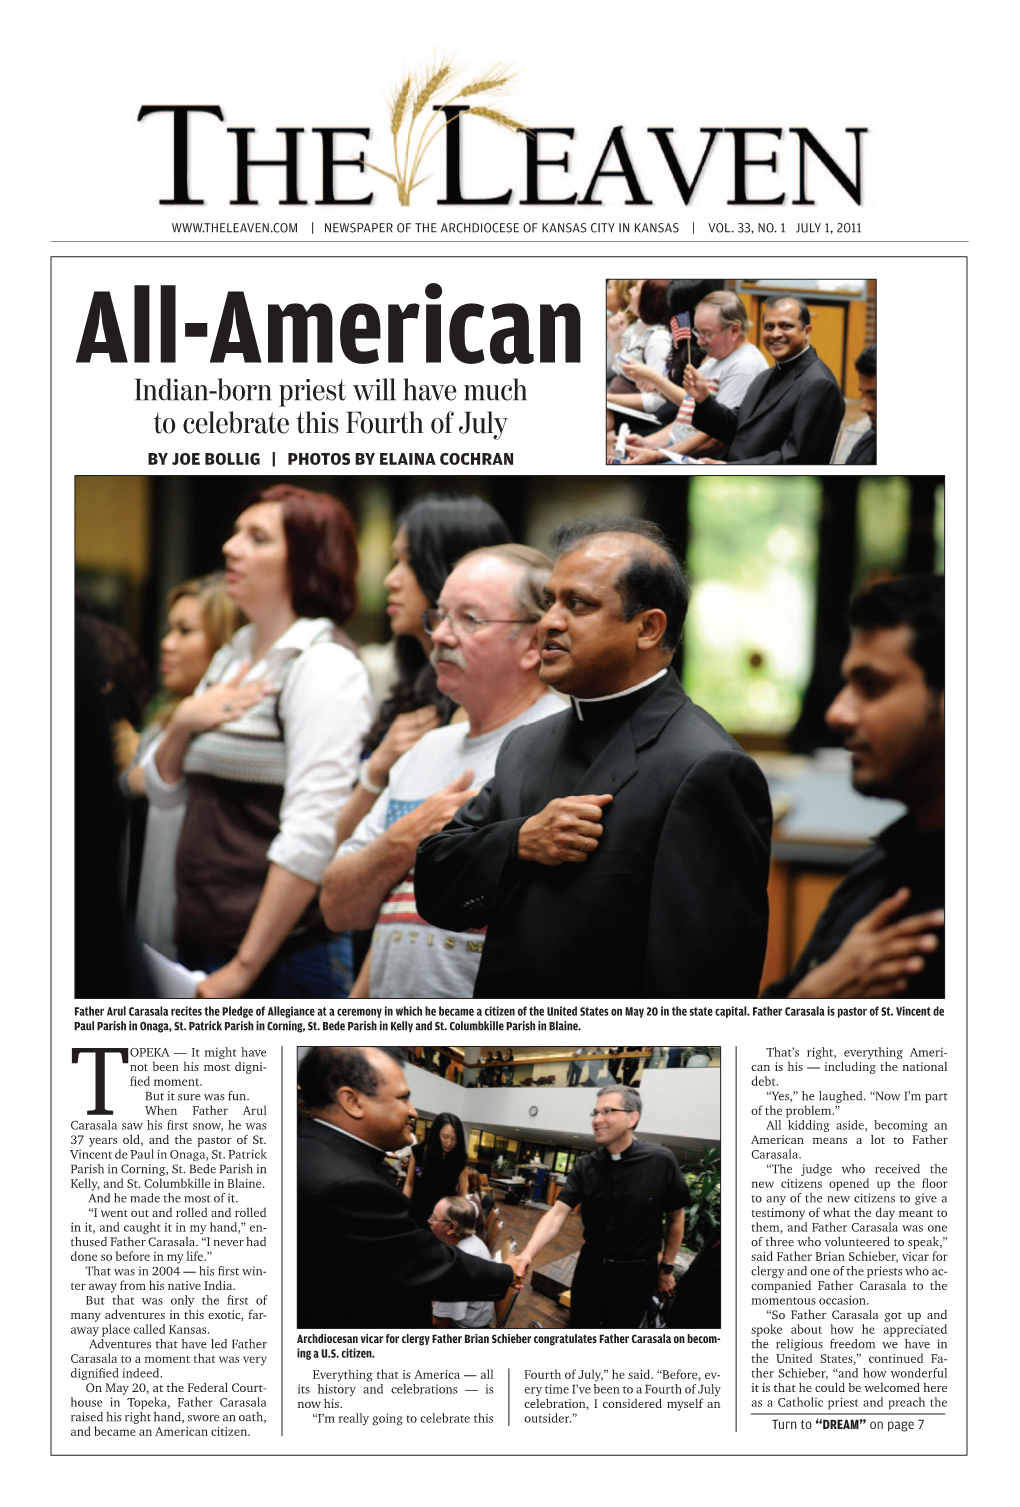 Indian-Born Priest Will Have Much to Celebrate This Fourth of July by Joe Bollig | Photos by Elaina Cochran